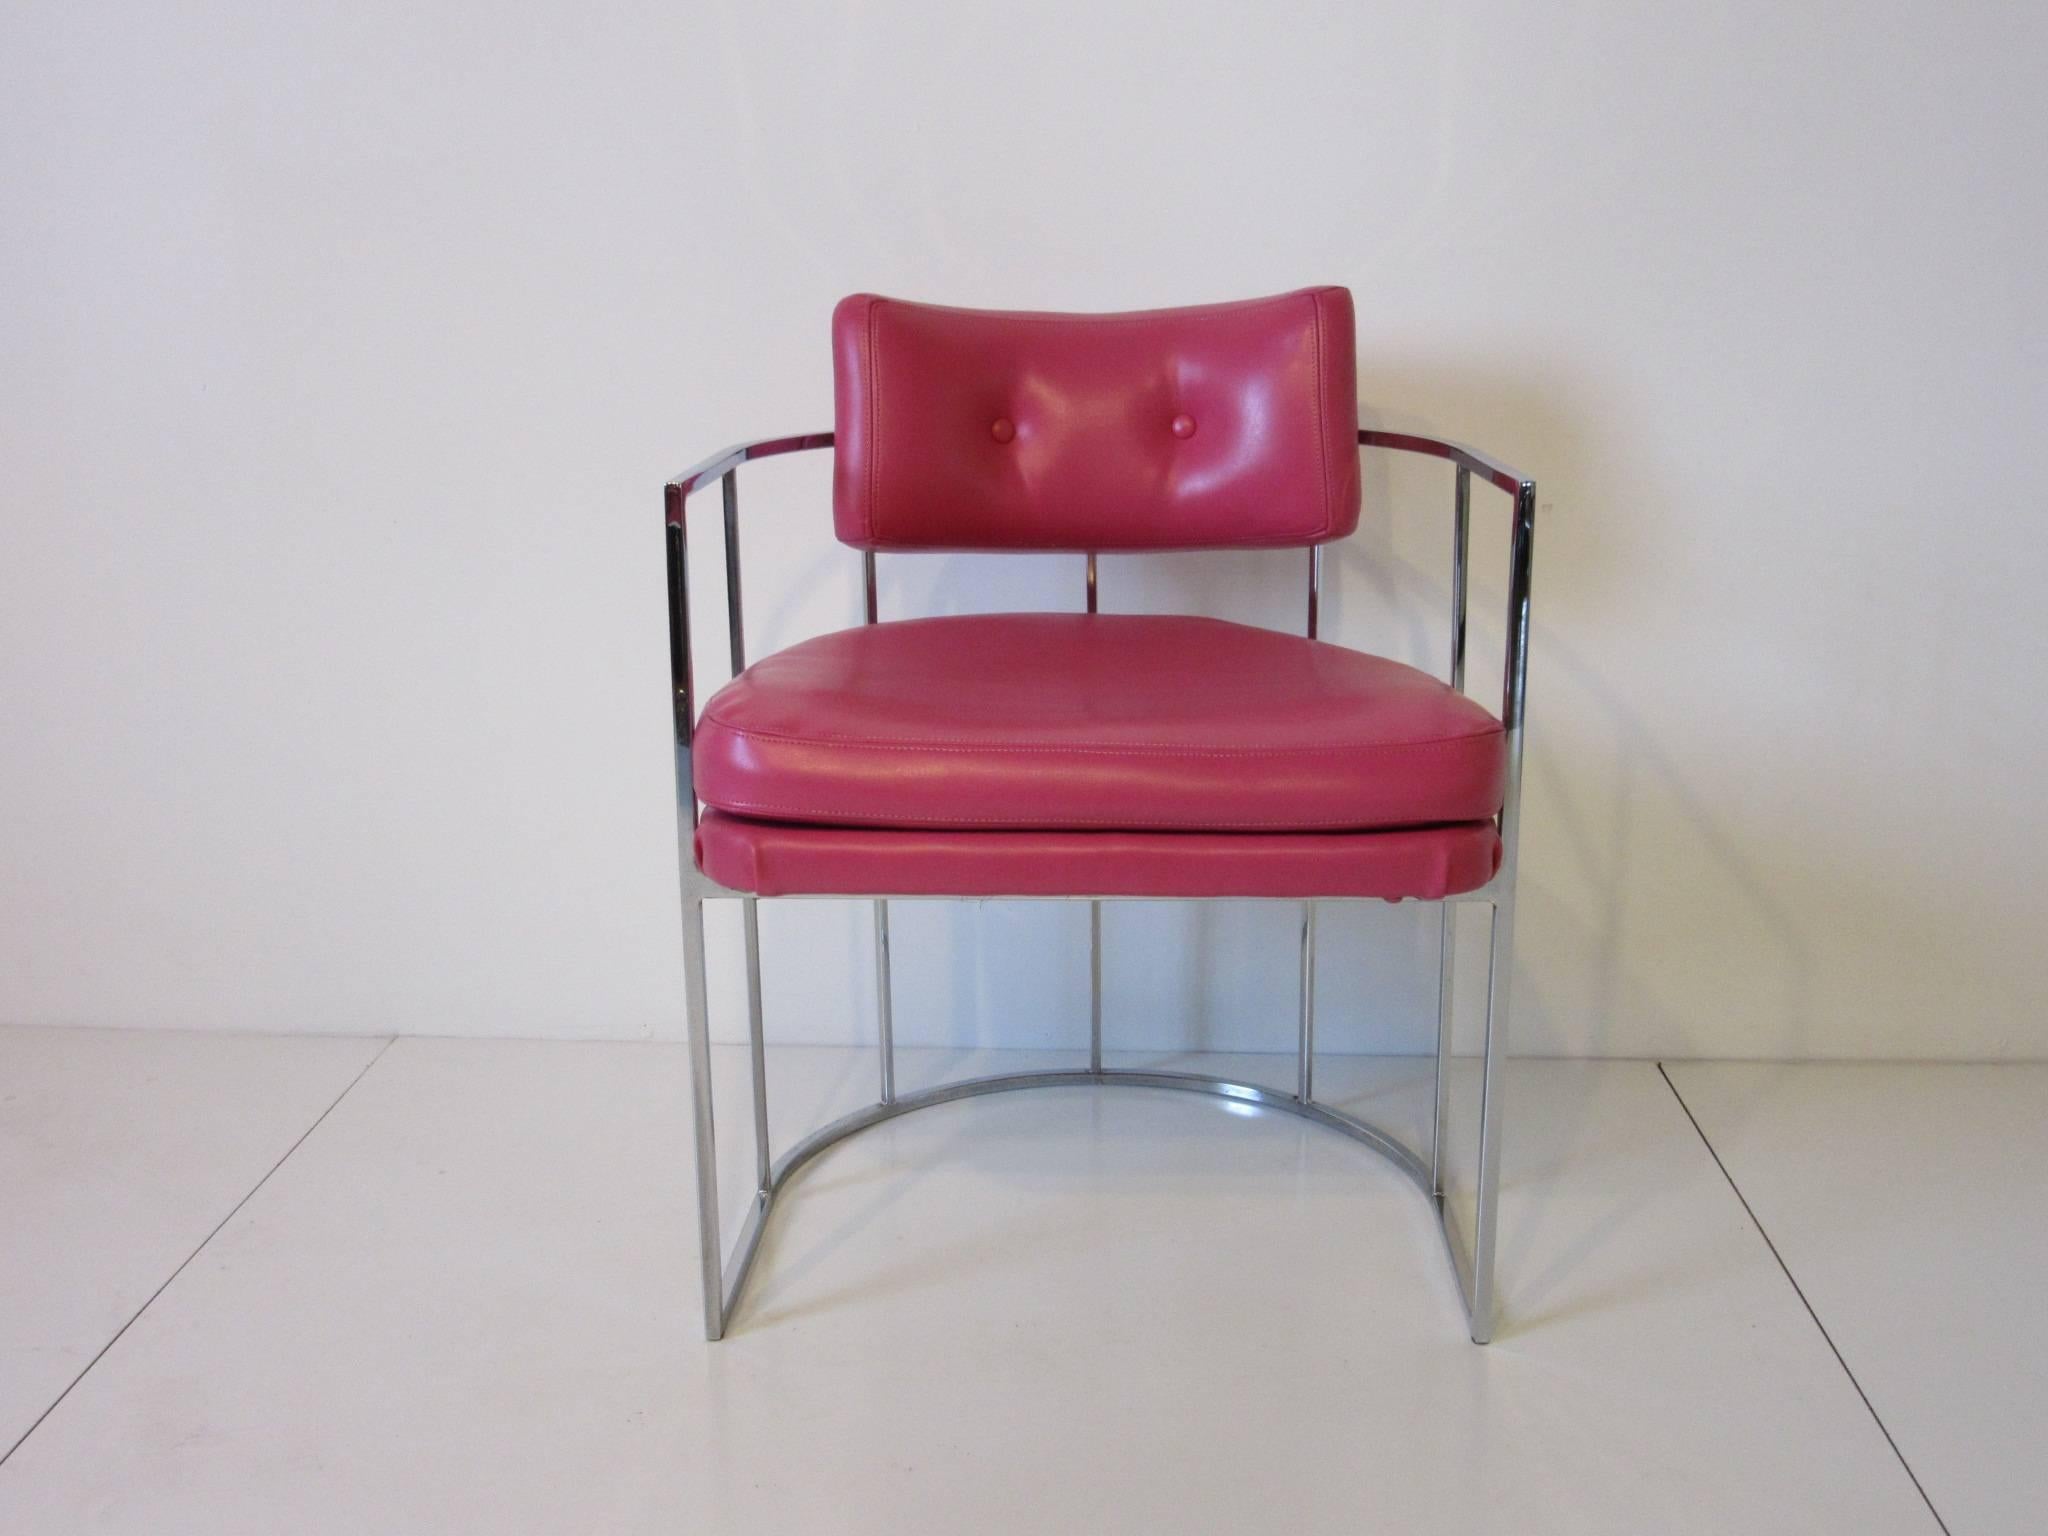 A pair of Milo Baughman designed chairs with square chrome bar frame and Magenta / Fuchsia colored Naugahyde upholstered back and bottom cushions. Retains the manufactures label to the seat by the Thayer Coggin furniture Company.